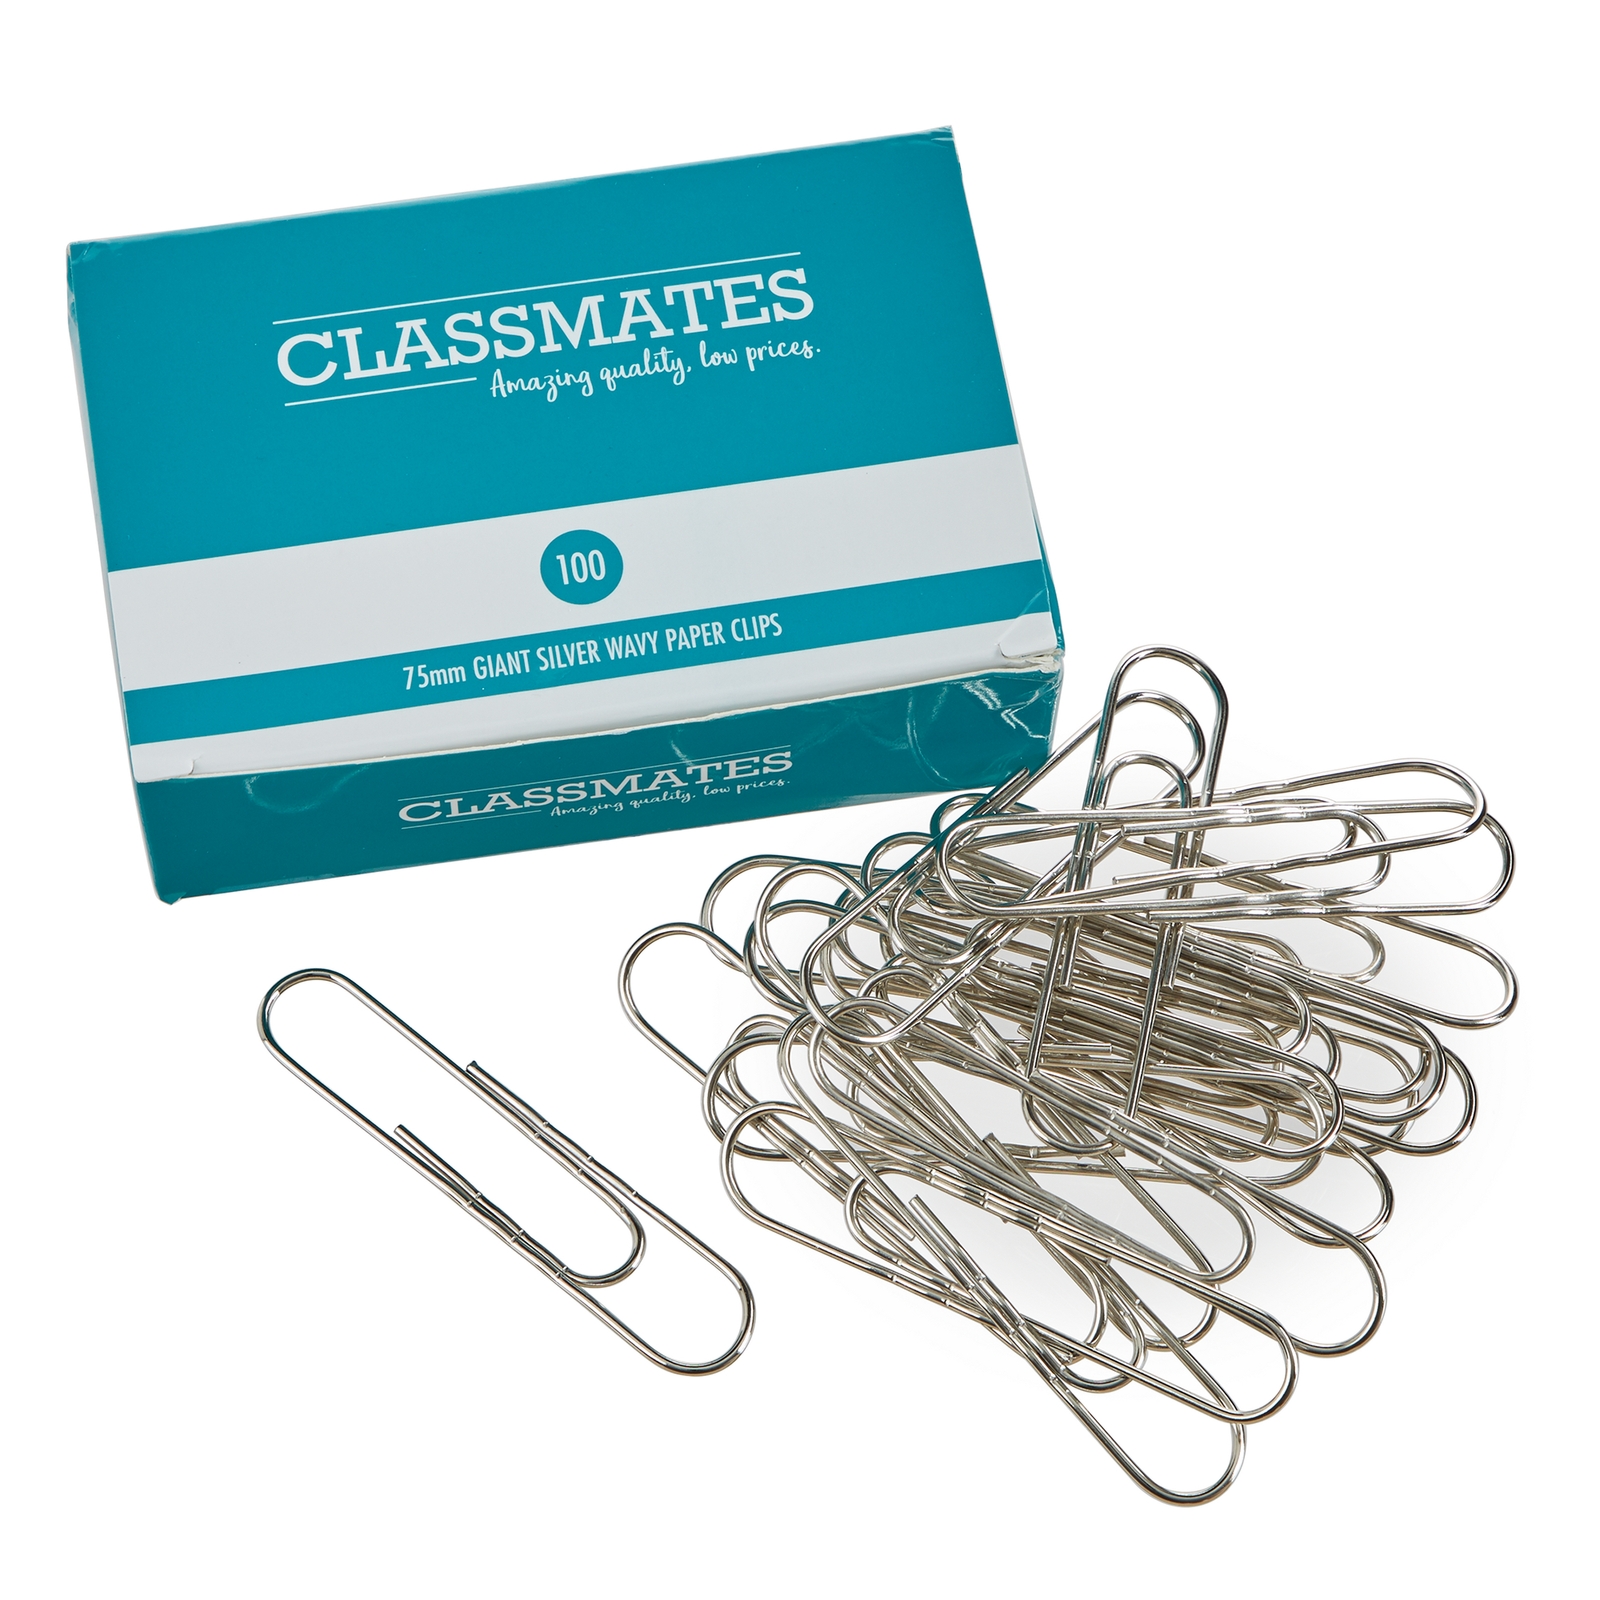 Classmates Wavy Paper Clips Giant 75mm - Pack of 100